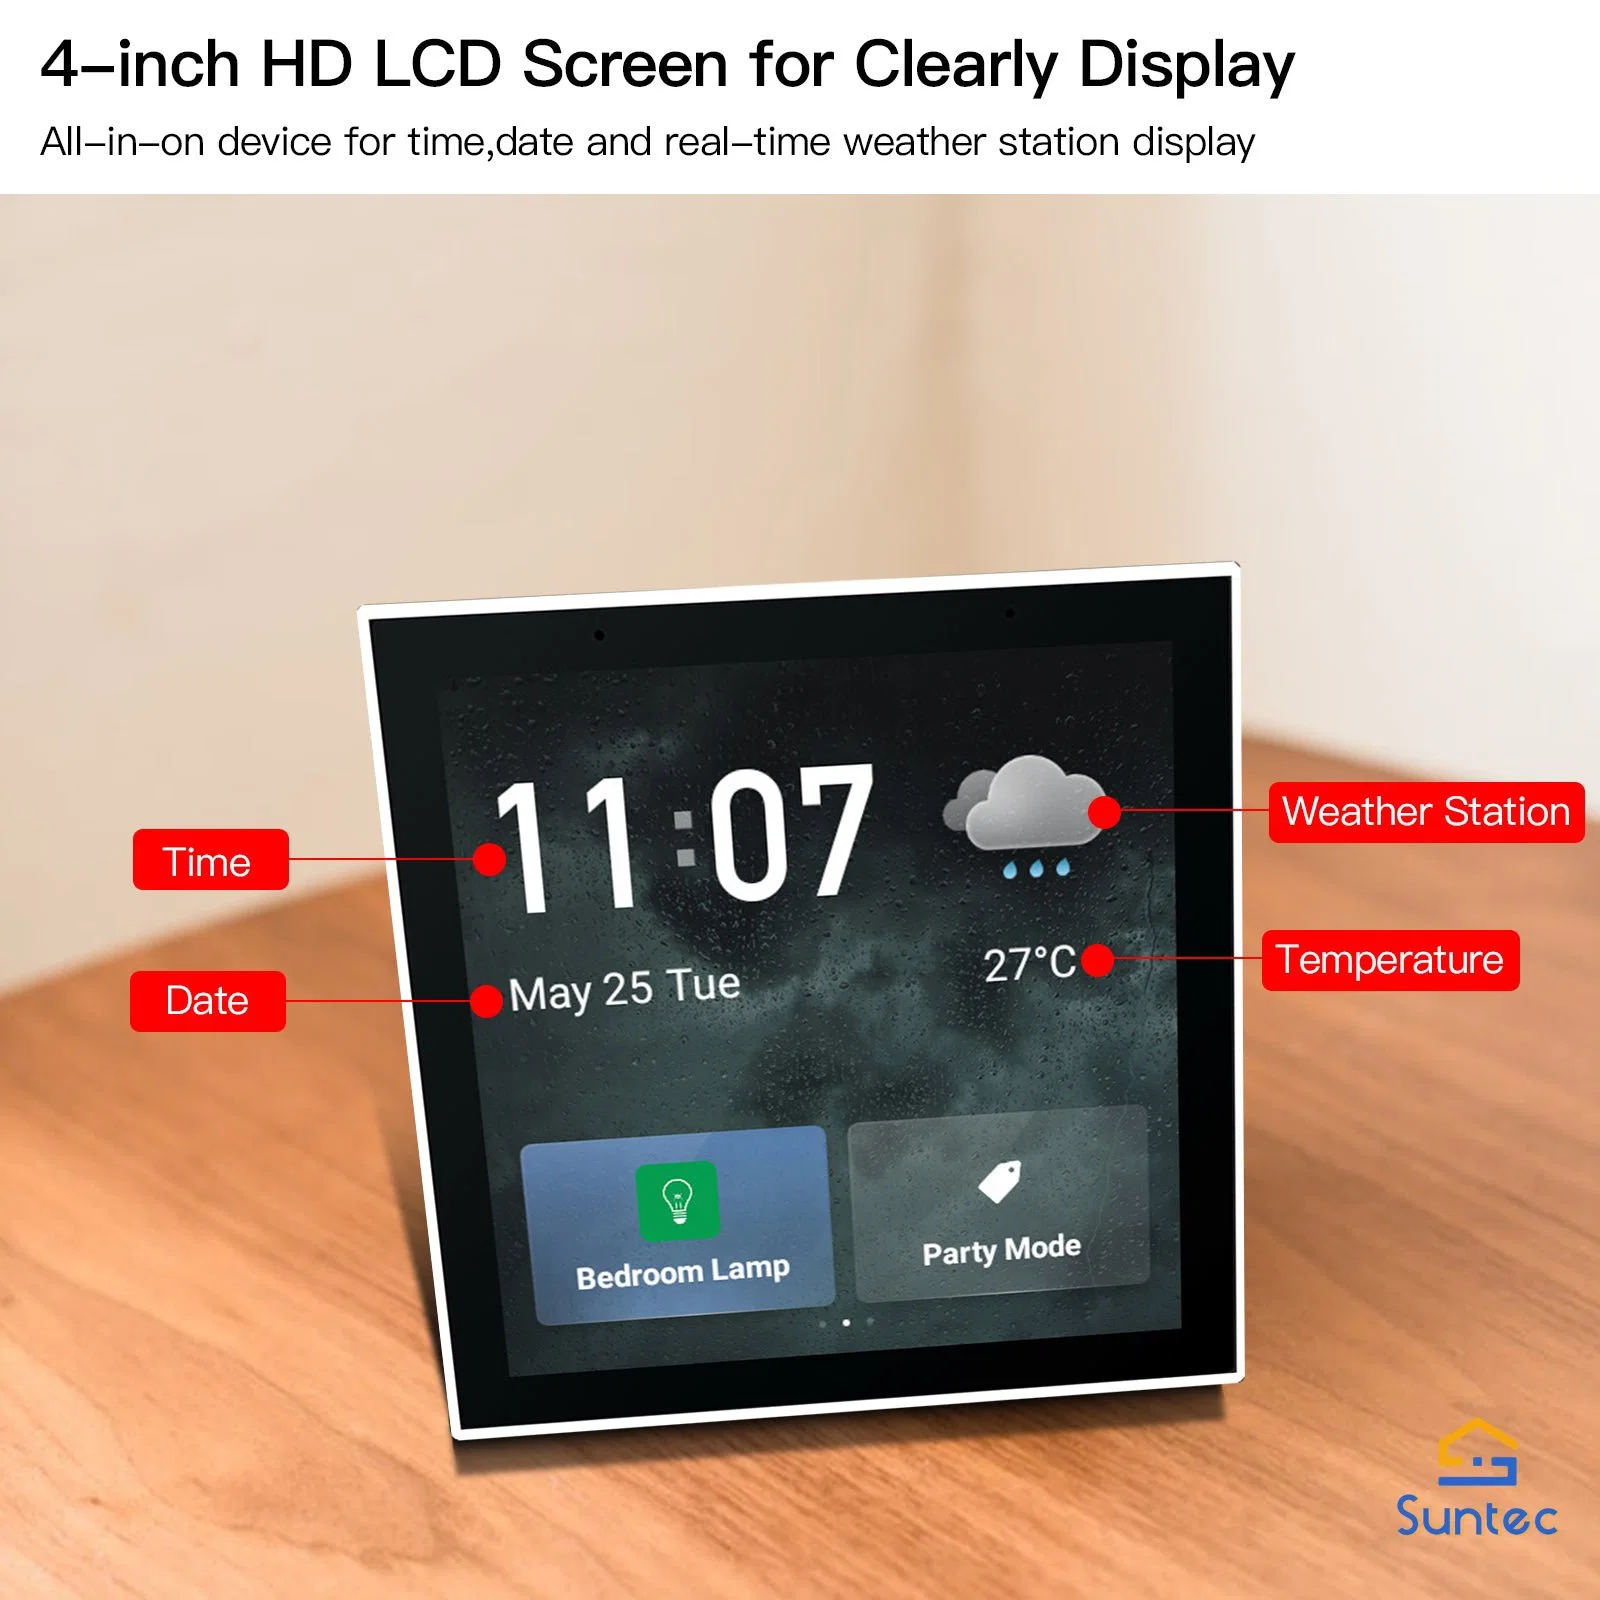 Multi-Functional Tuya Smart Central Control Screen Panel with 4 Inch LCD Display for Home Automation